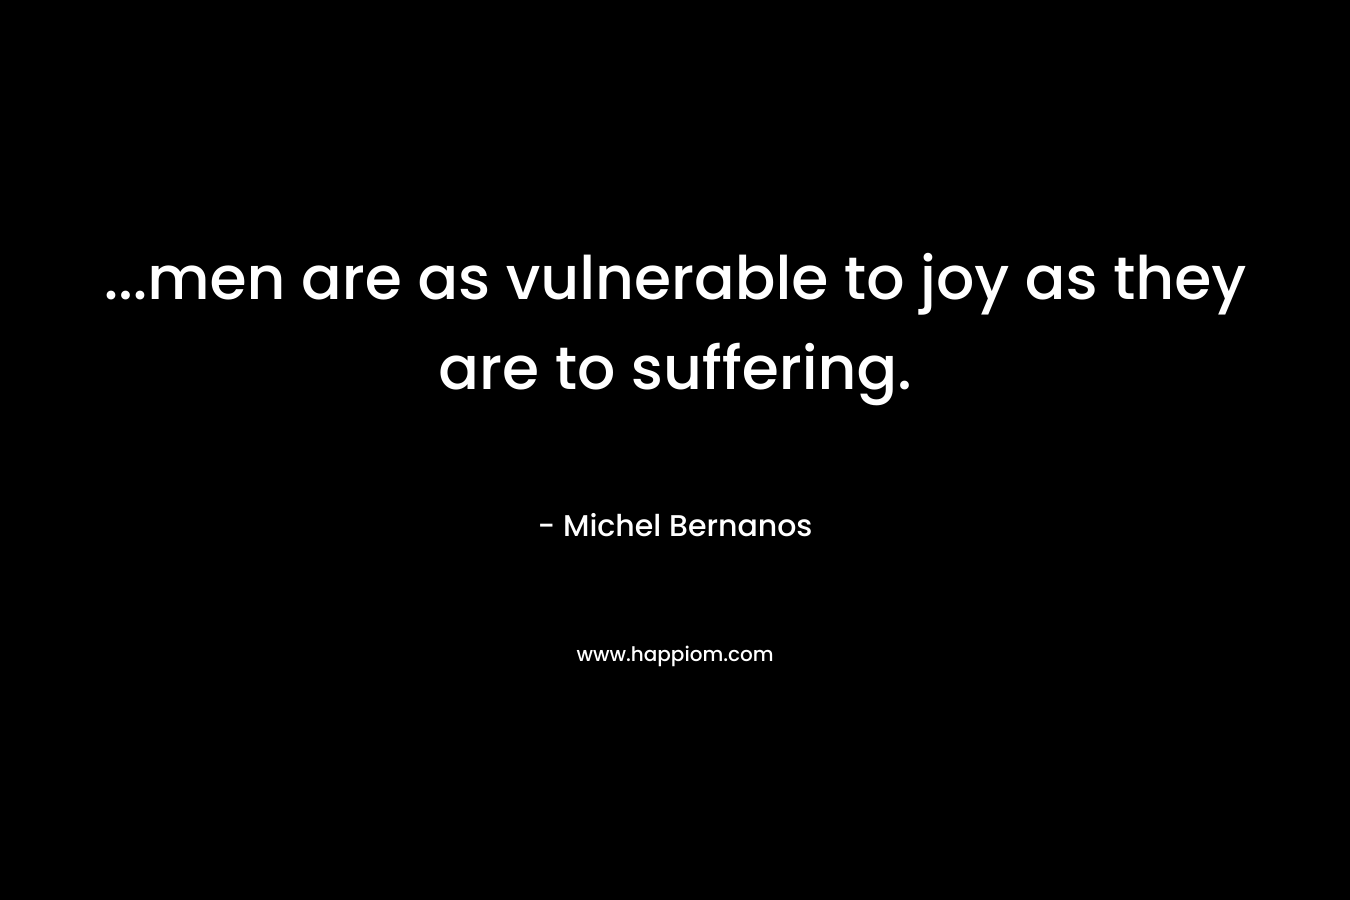 ...men are as vulnerable to joy as they are to suffering.